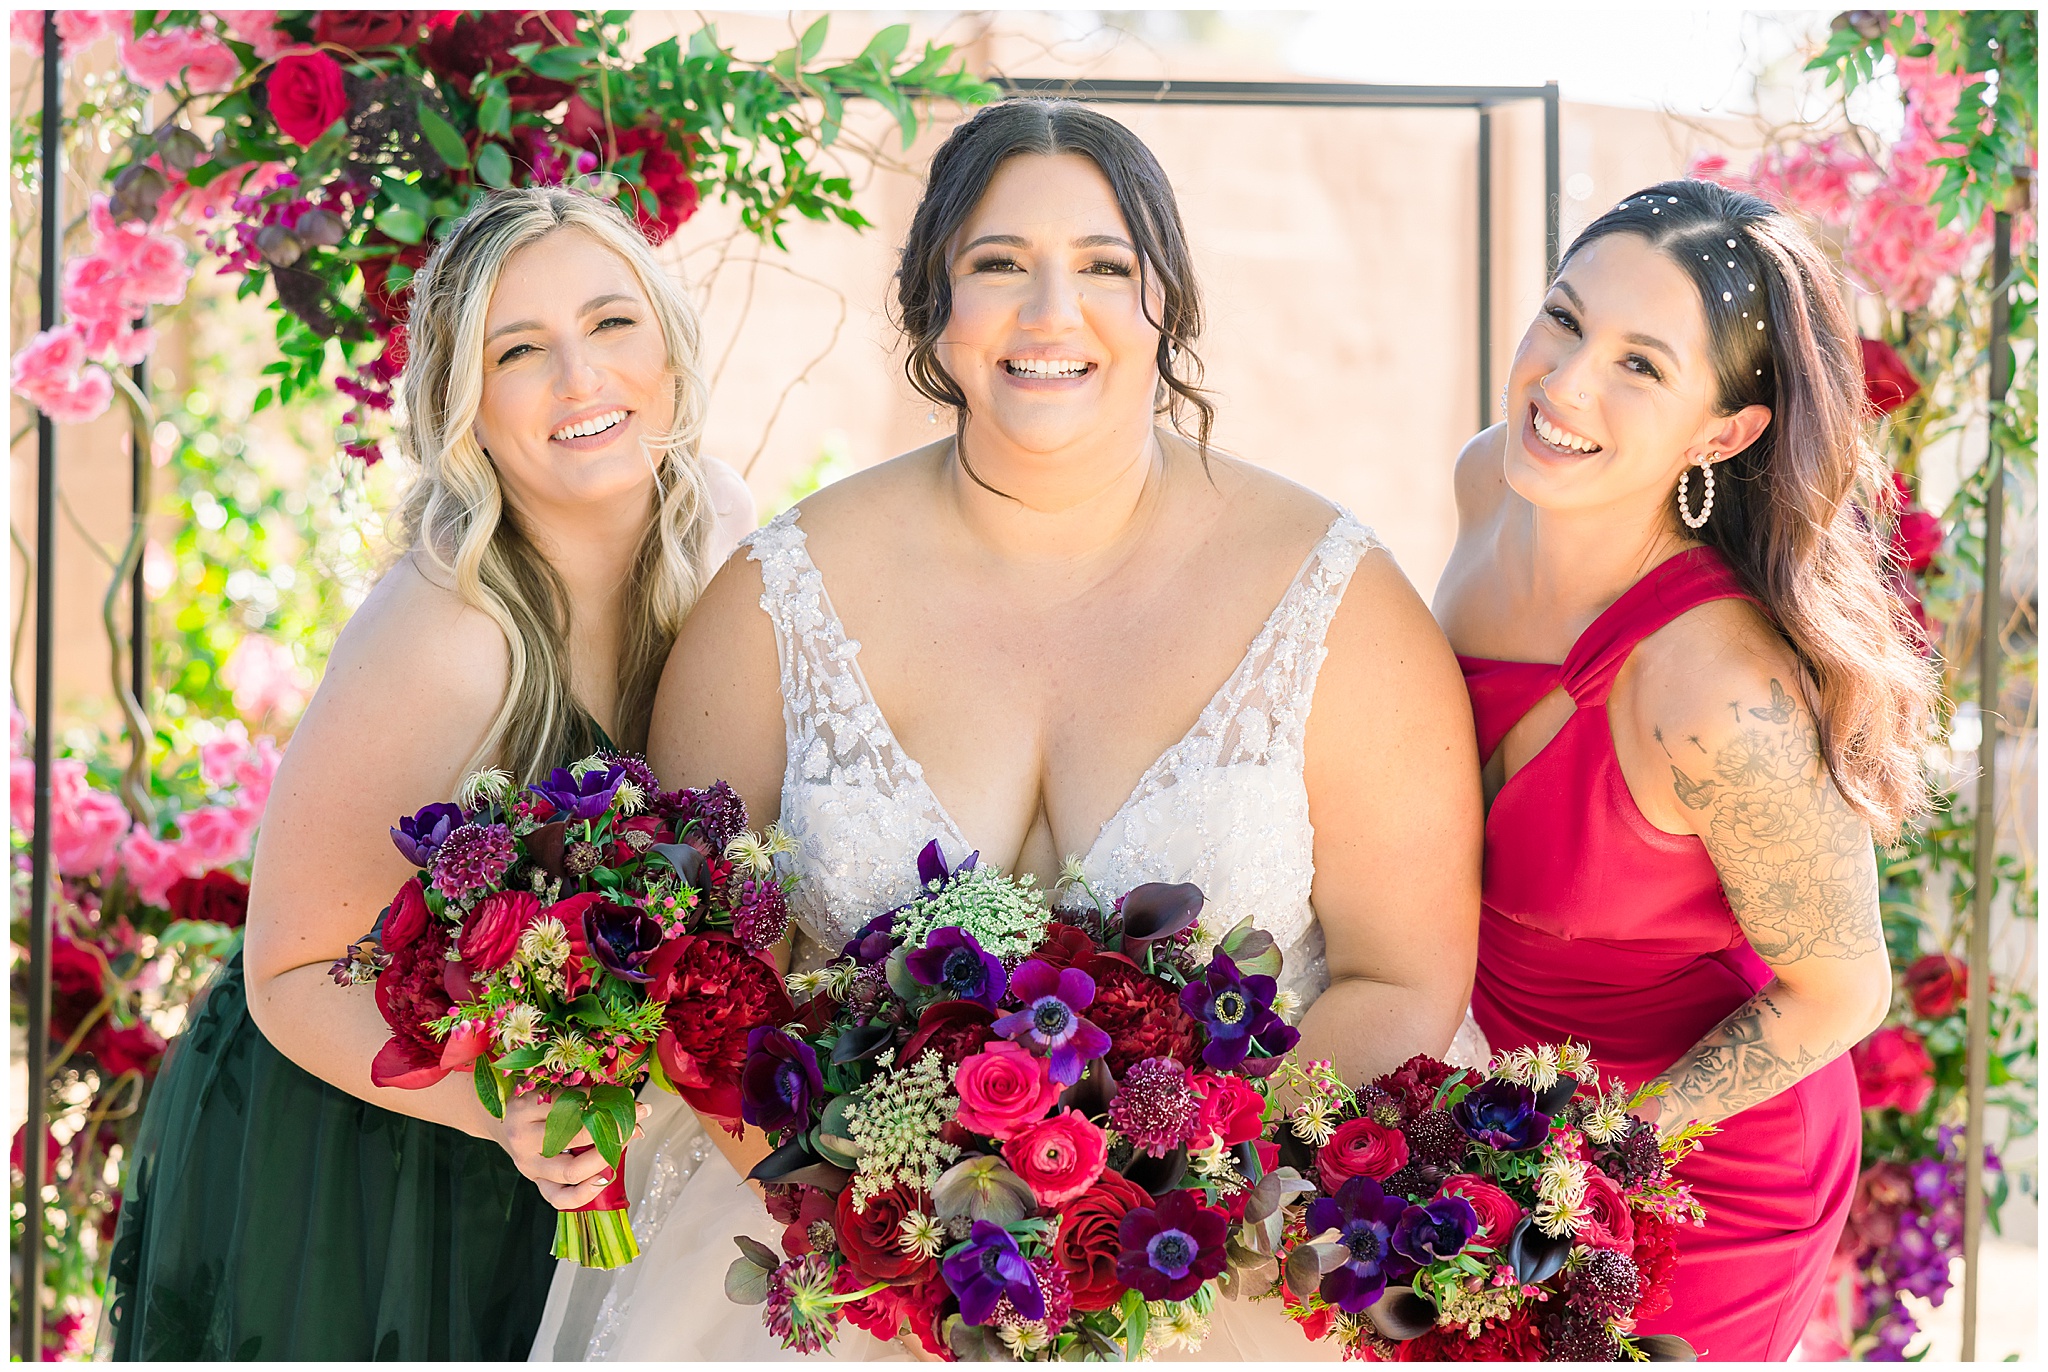 Bridesmaids with bride in pink dress, green dress with flowers